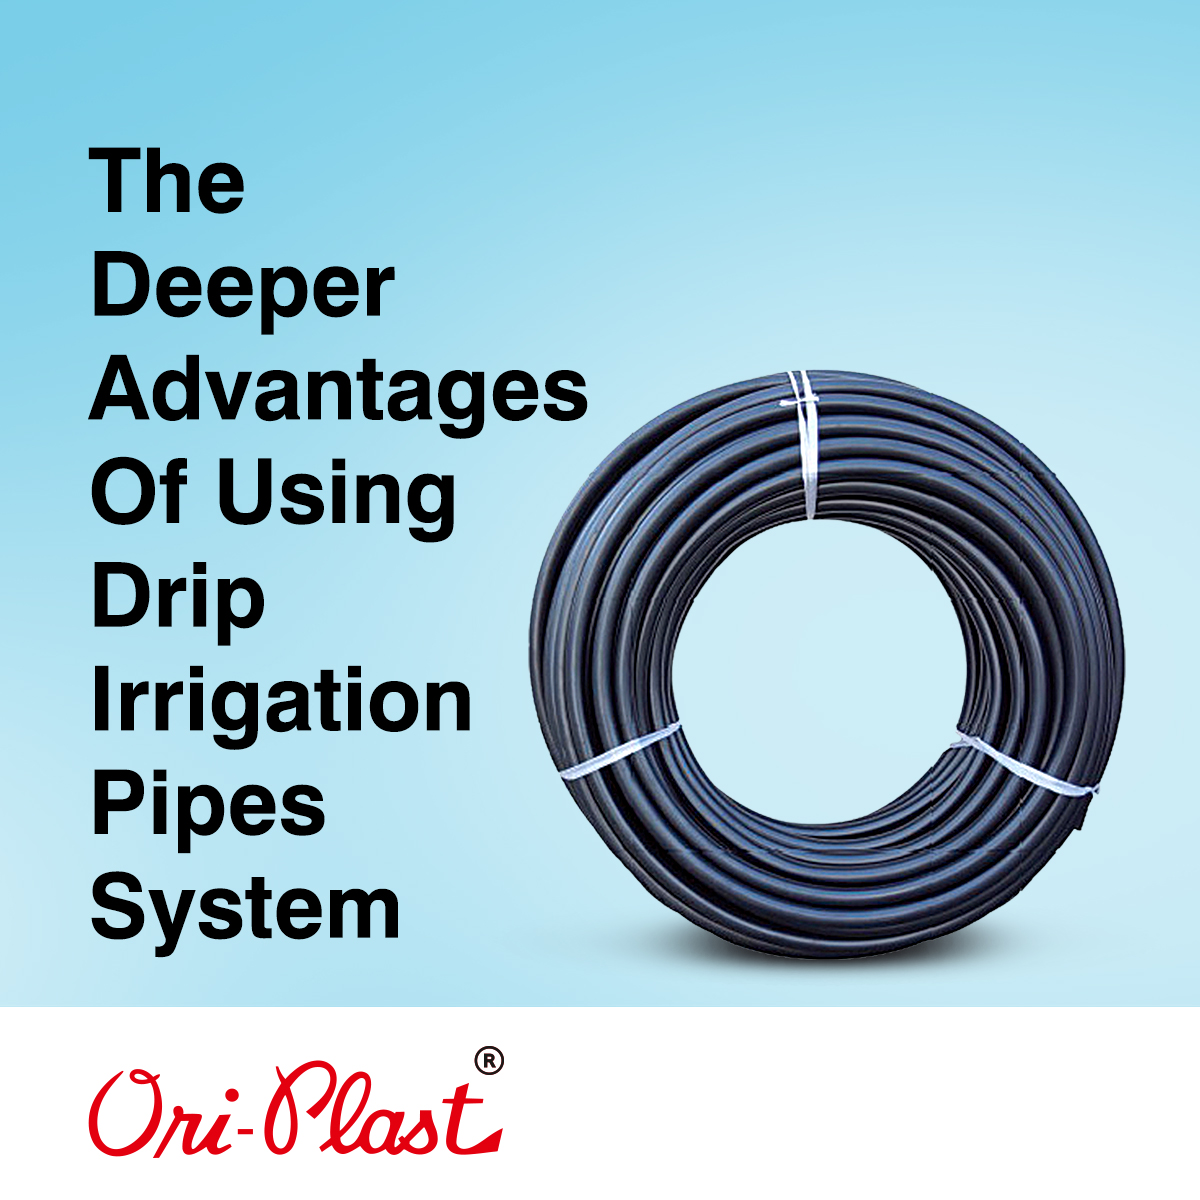 The Deeper Advantages of using Drip Irrigation Pipes System